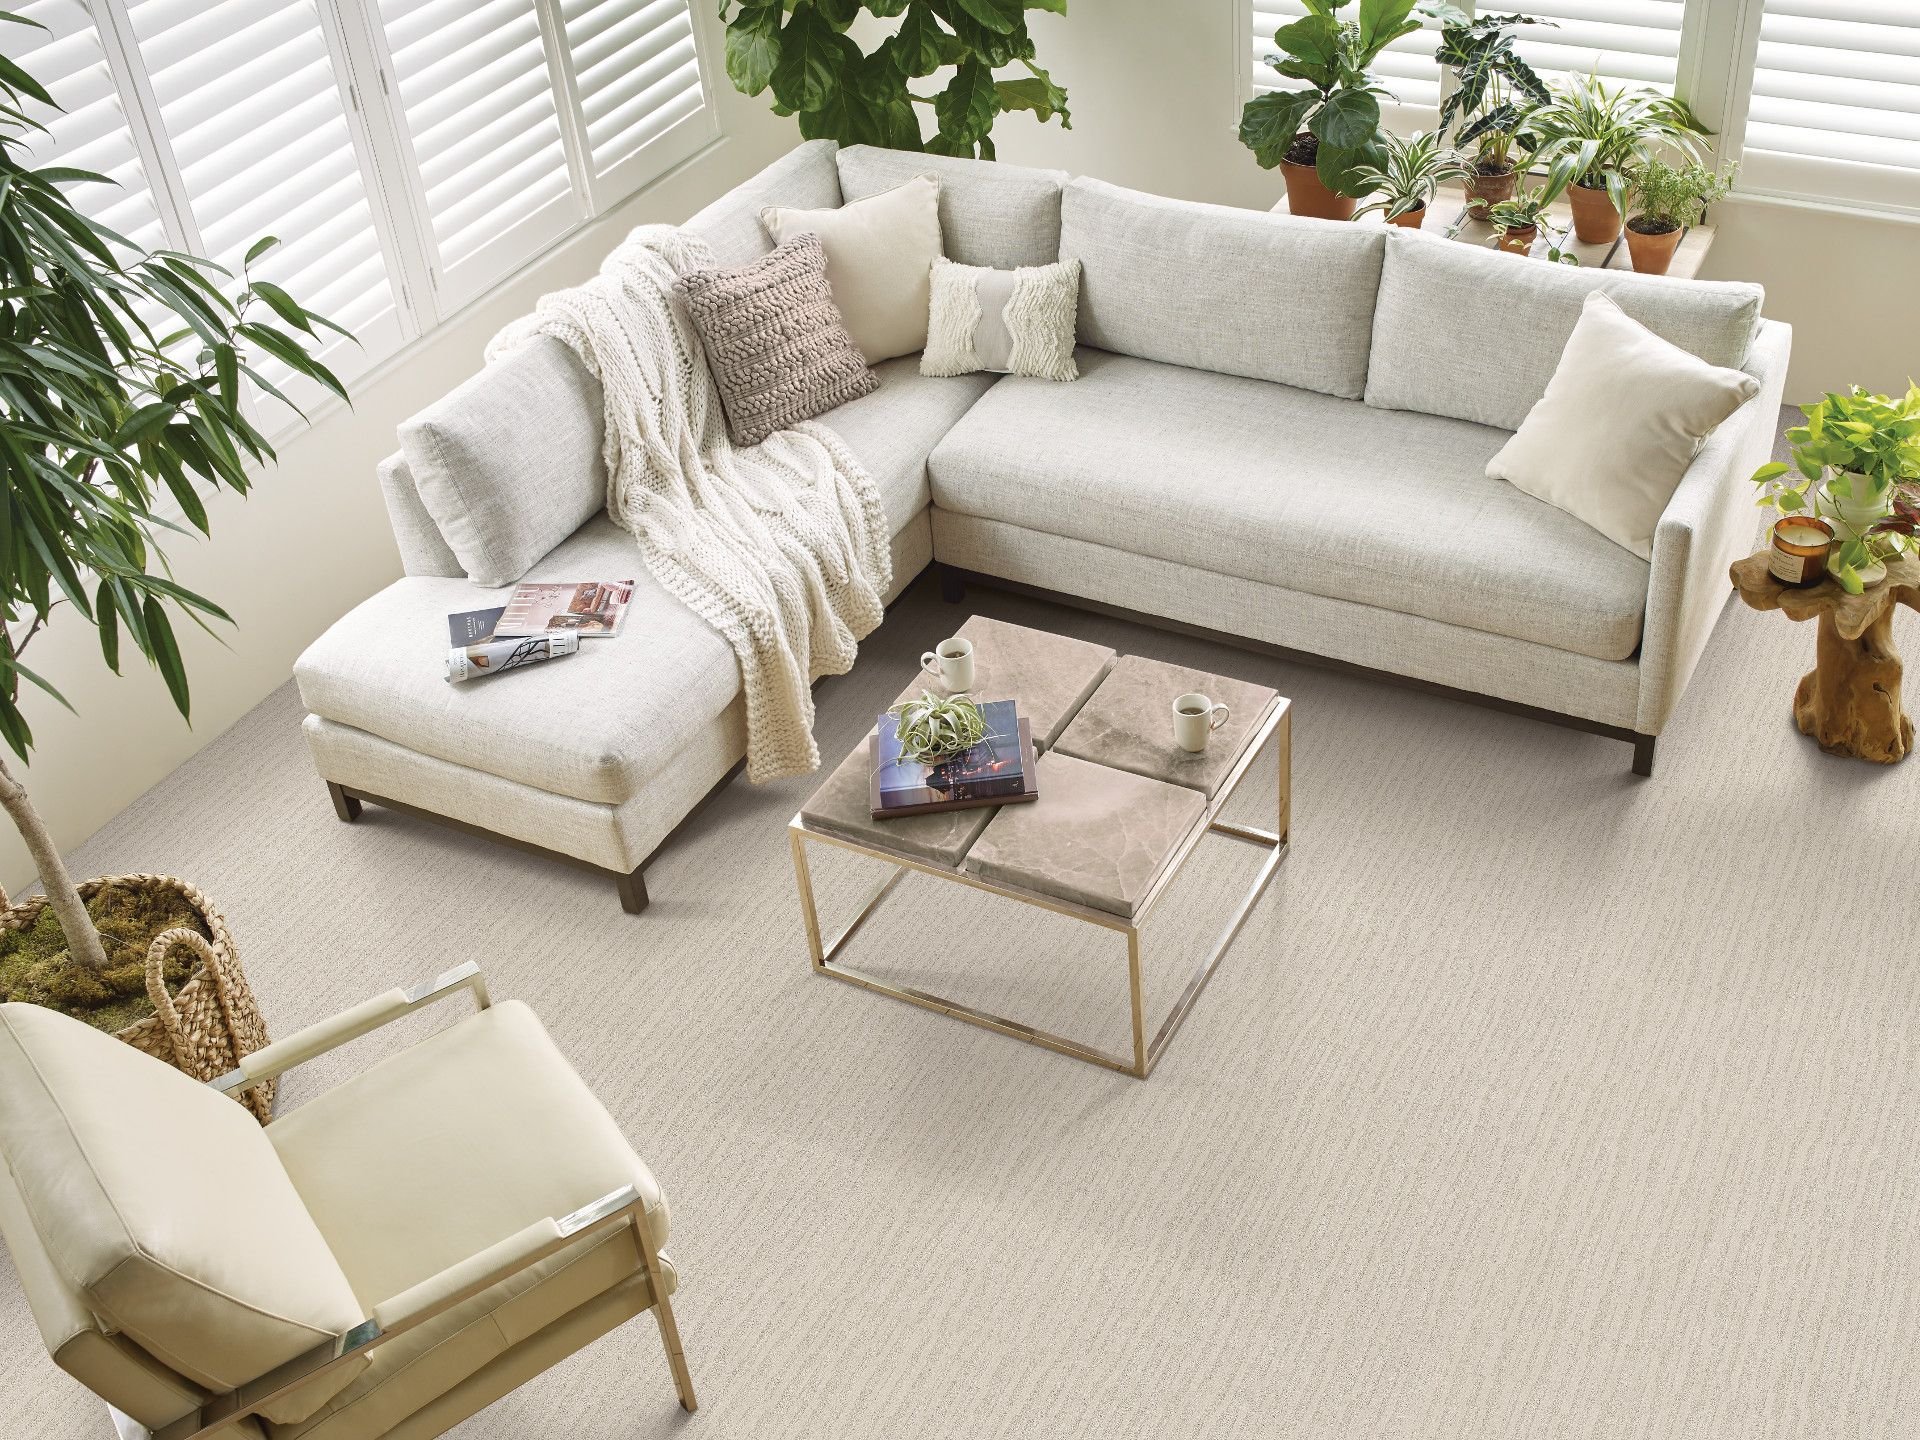 large living room with white couch on carpet from Migliore’s Flooring & Rugs in Cookeville